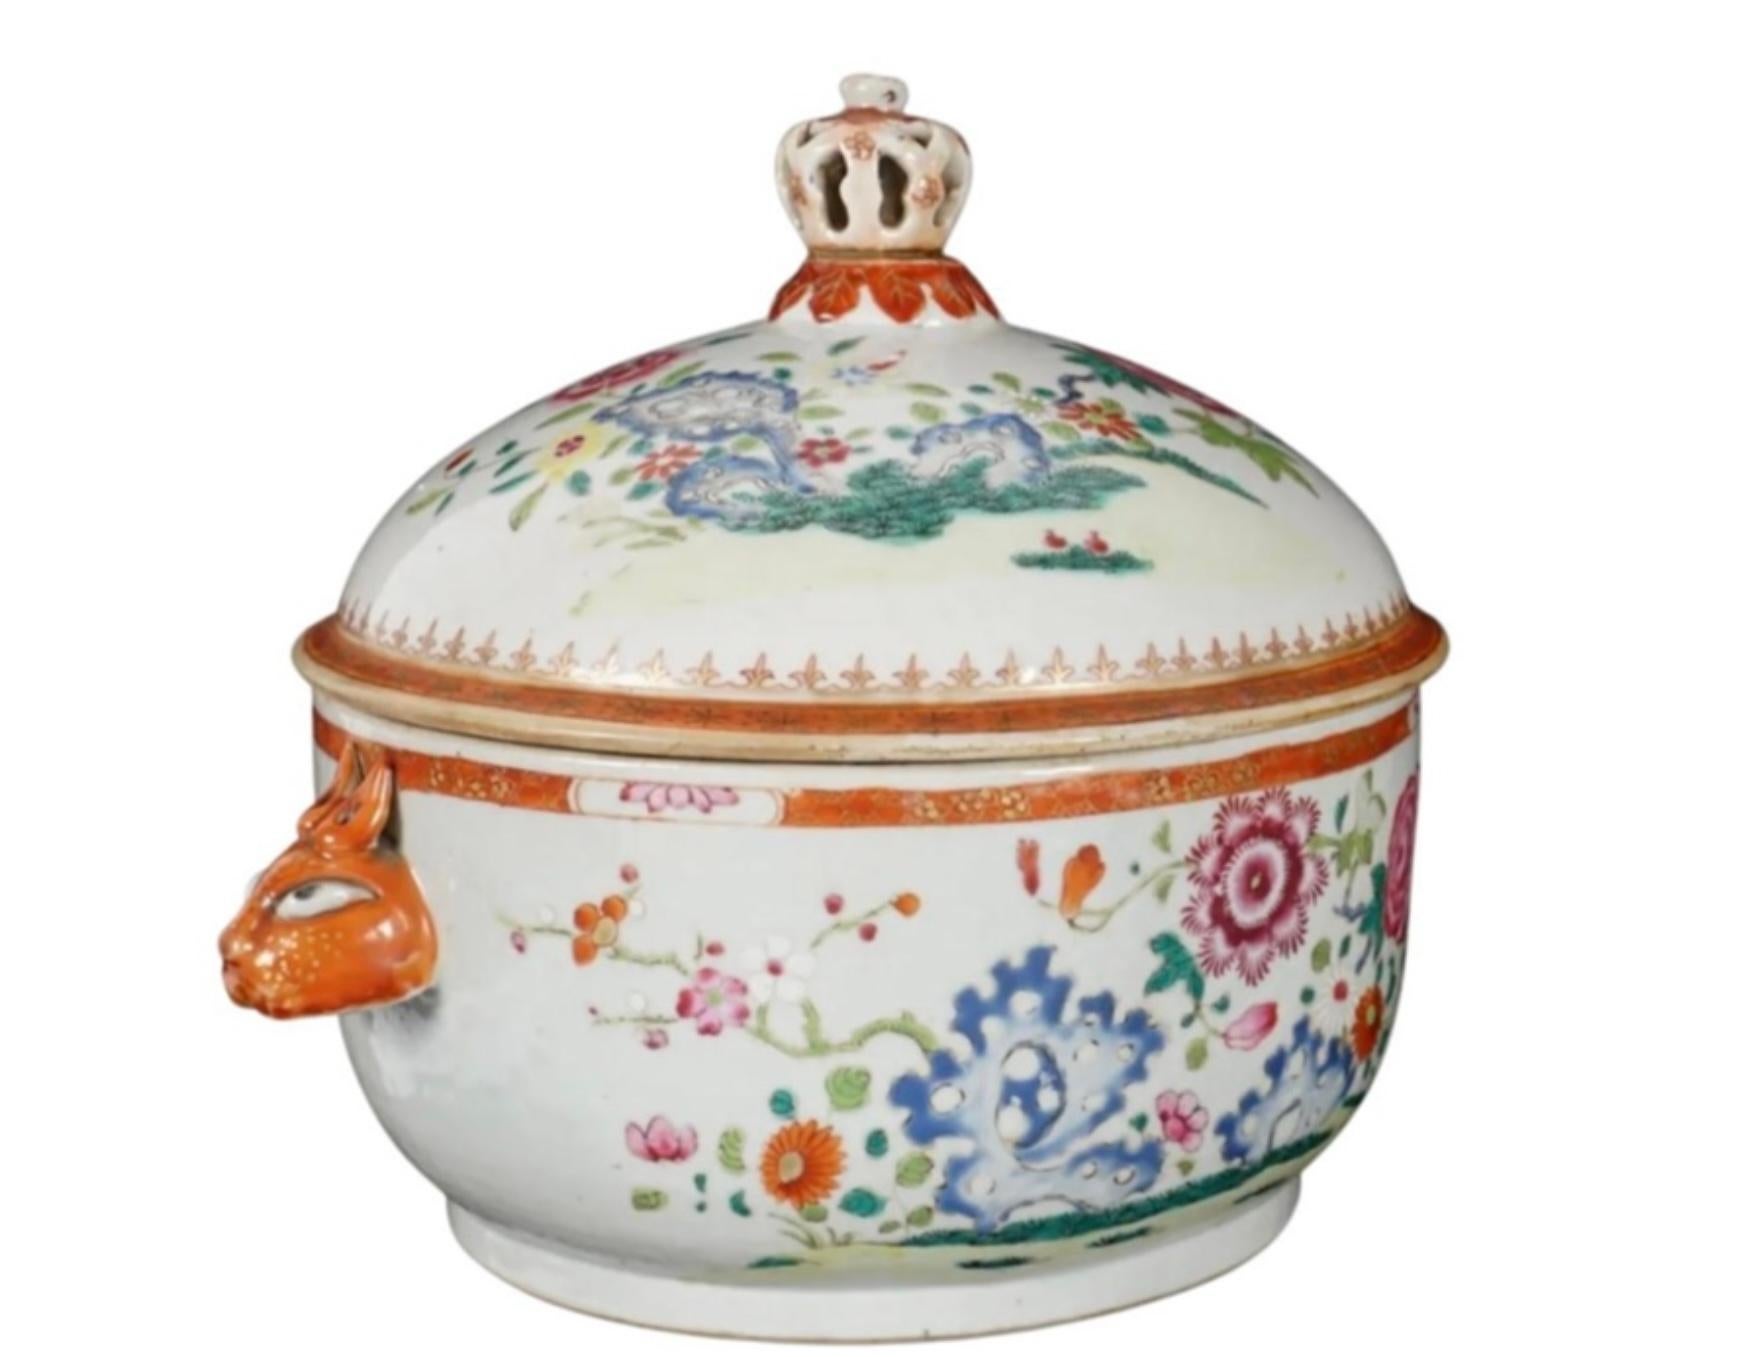 Chinese export covered bowl with rabbit handles. Porcelain covered serving bowl with floral decoration and affixed rabbit head handles, unsigned. 
This is an extraordinary example of the Chinese export porcelain and is delicately decorated with